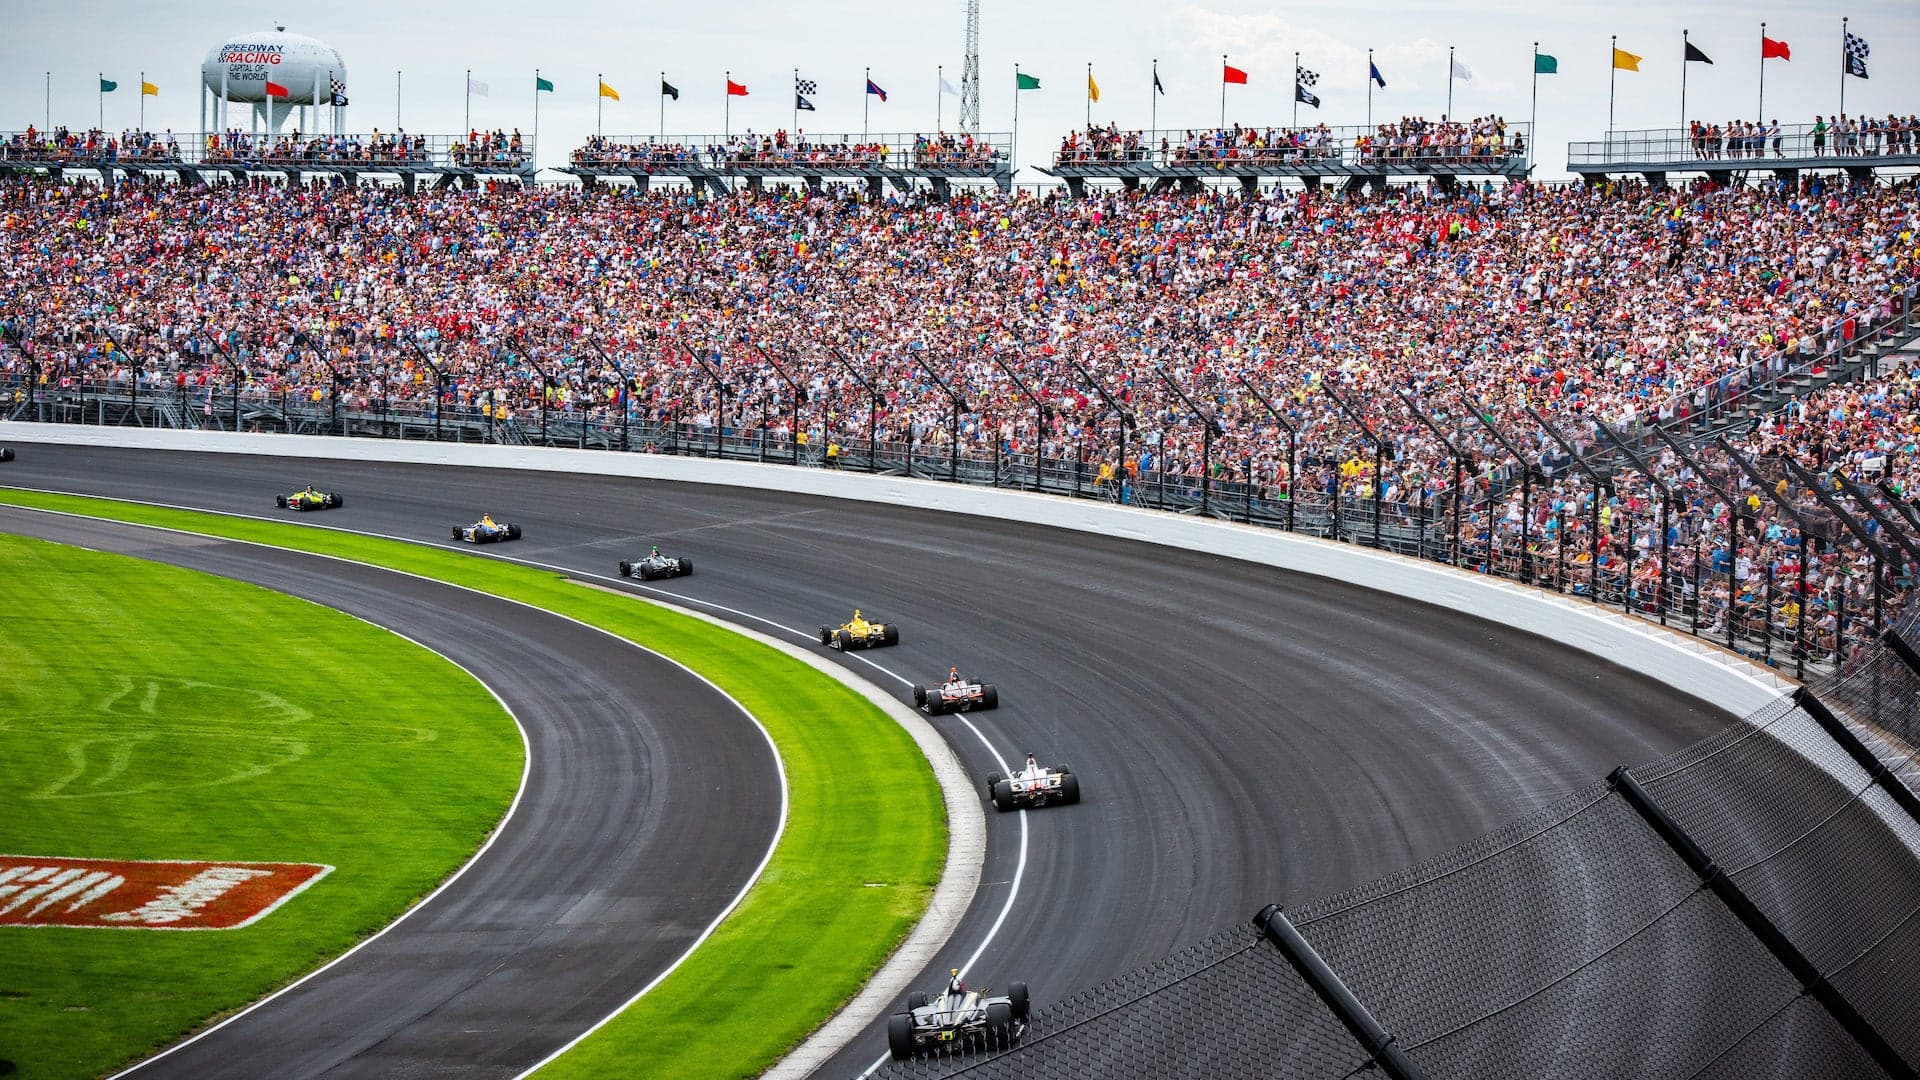 Roger Penske Wants to Host 250,000 Fans at This Year’s Indy 500